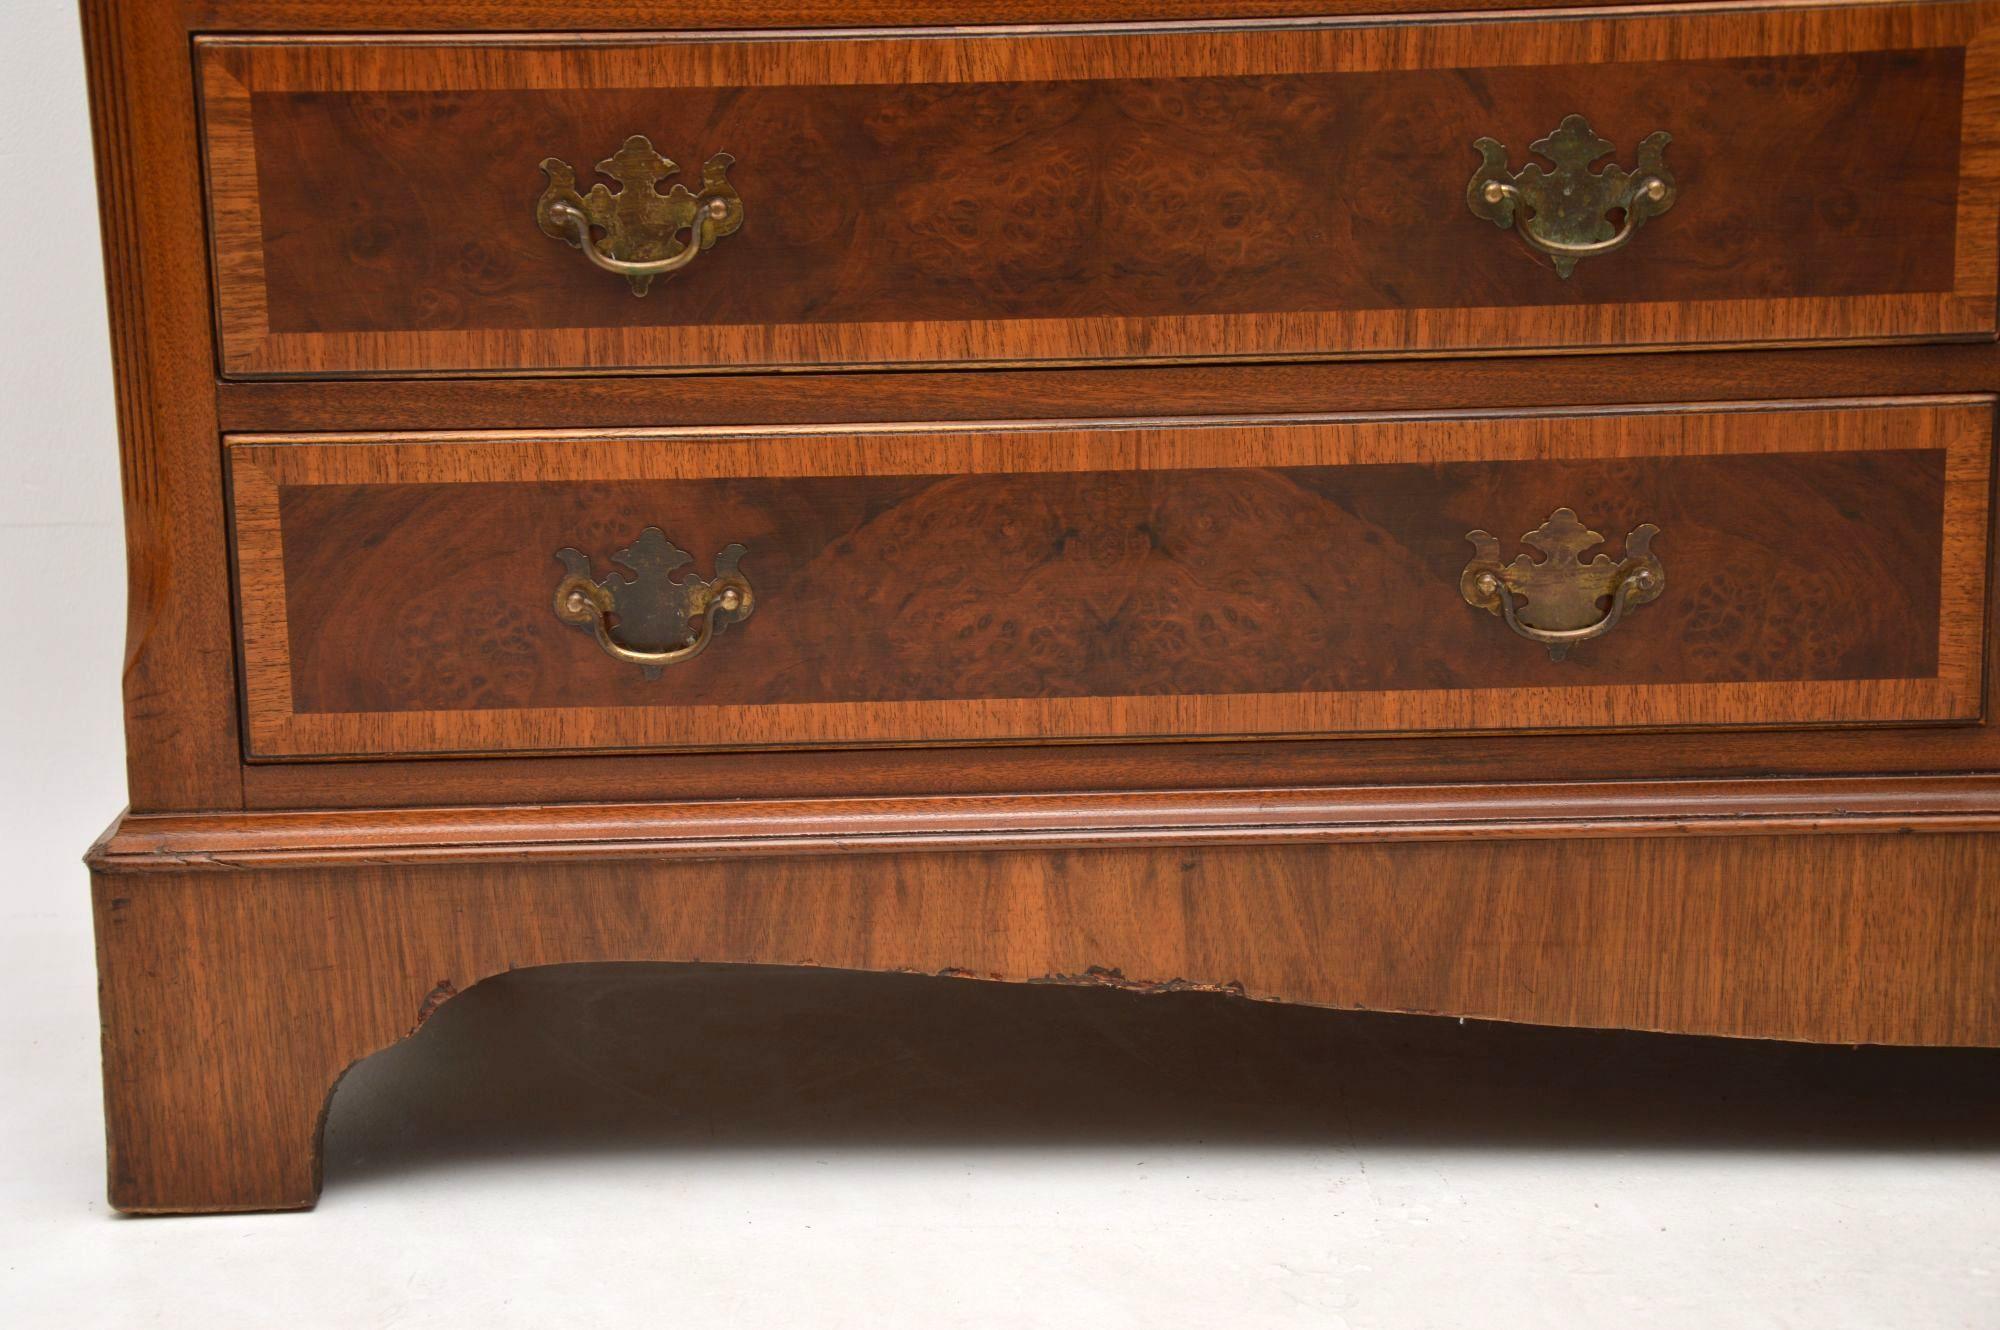 Antique Burr Walnut Long Low Chest of Drawers (Englisch)